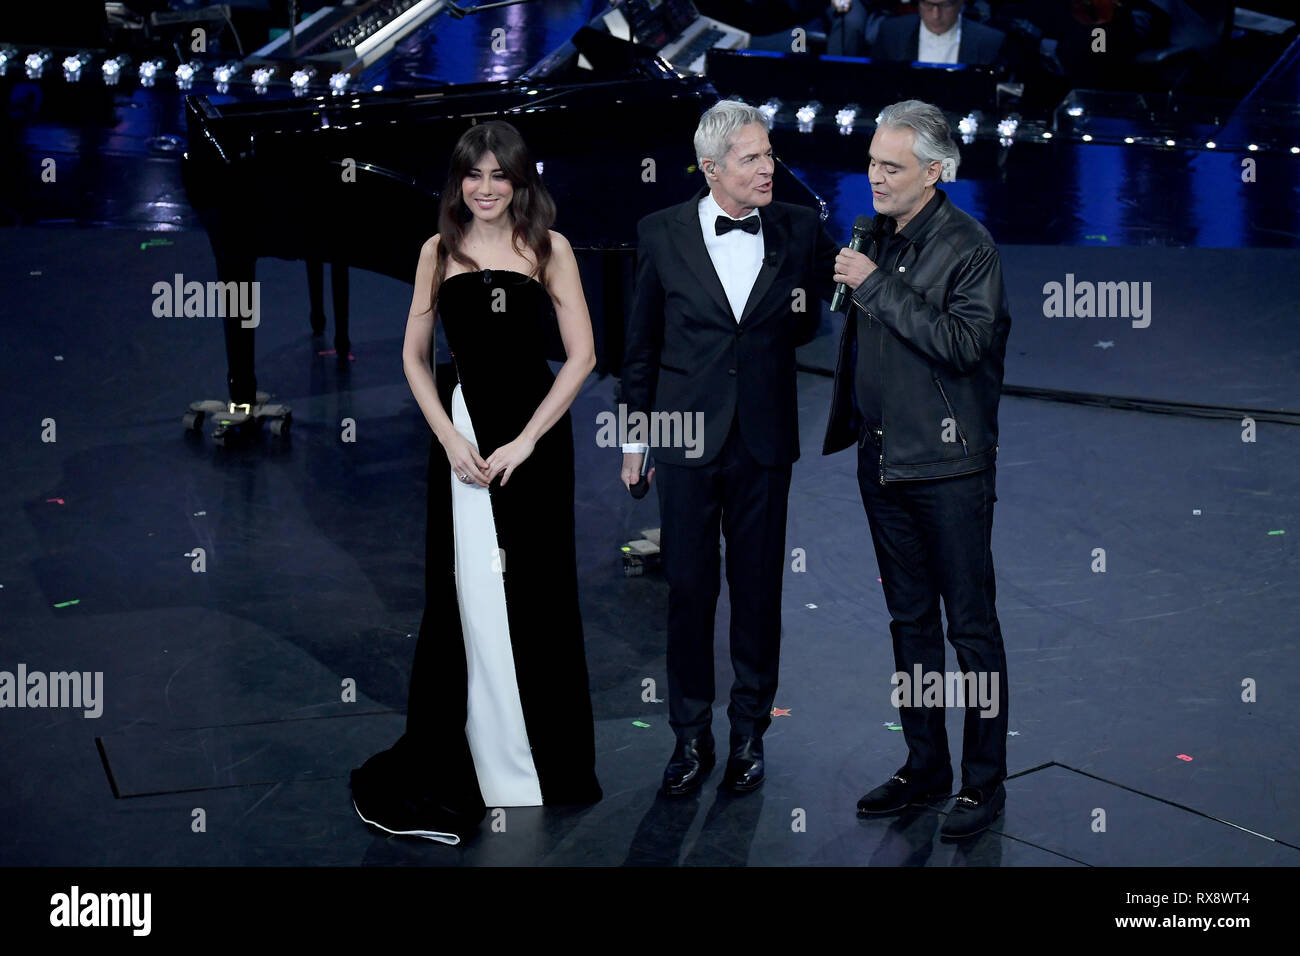 First evening of the 69th Annual Sanremo Festival of Italian Song held at Teatro Ariston of Sanremo  Featuring: Andrea Bocelli, Claudio Baglioni, Virginia Raffaele Where: Sanremo, Italy When: 05 Feb 2019 Credit: IPA/WENN.com  **Only available for publication in UK, USA, Germany, Austria, Switzerland** Stock Photo